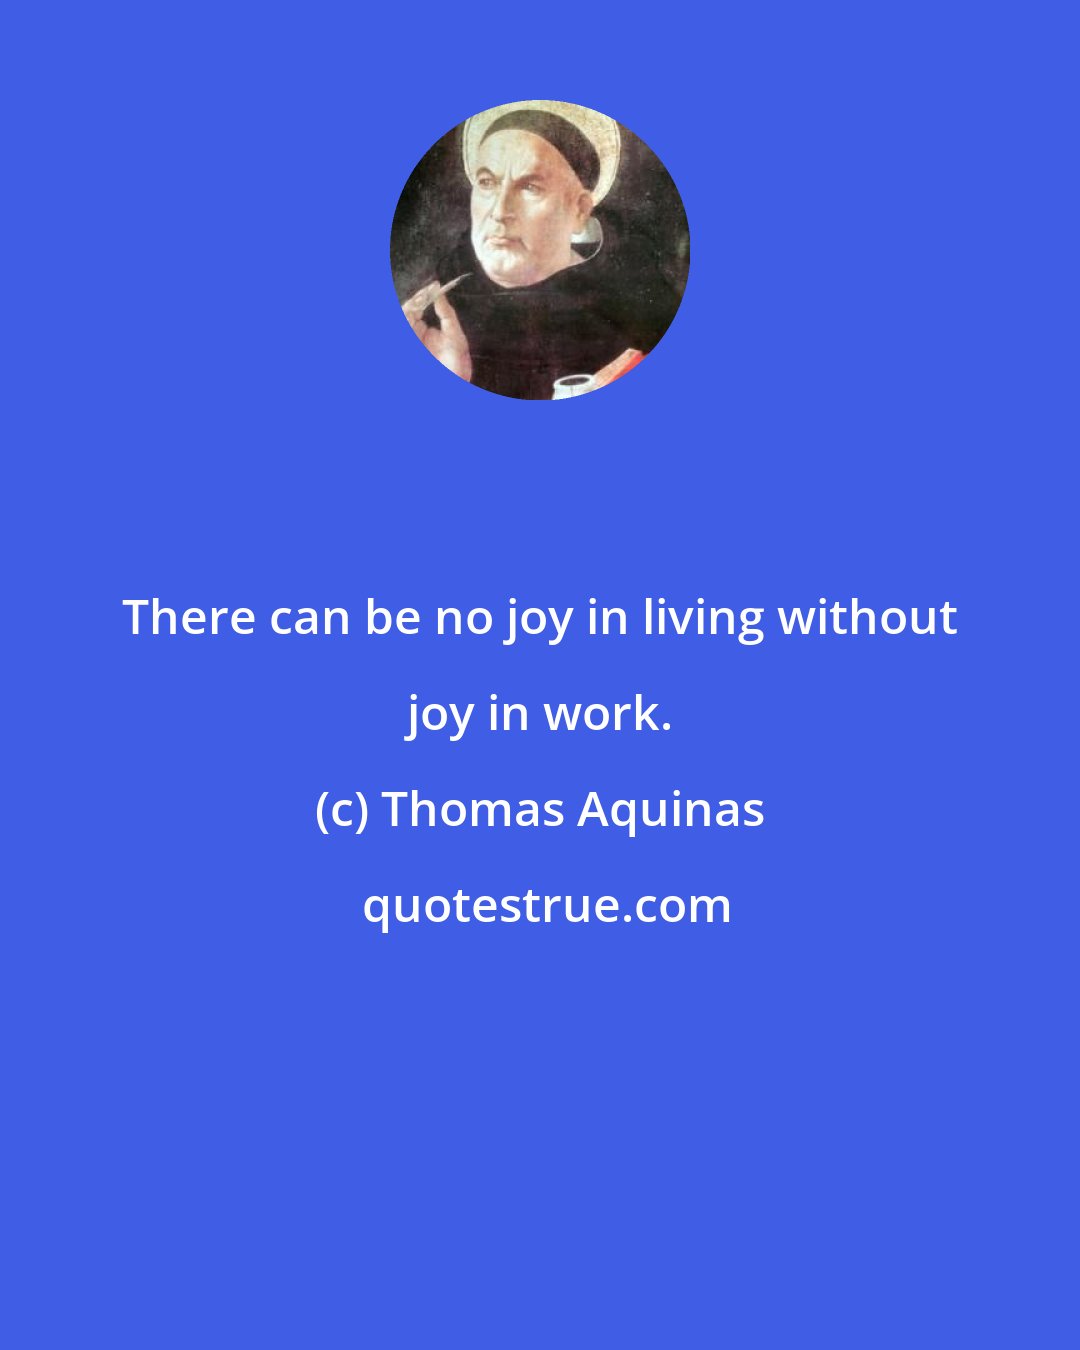 Thomas Aquinas: There can be no joy in living without joy in work.